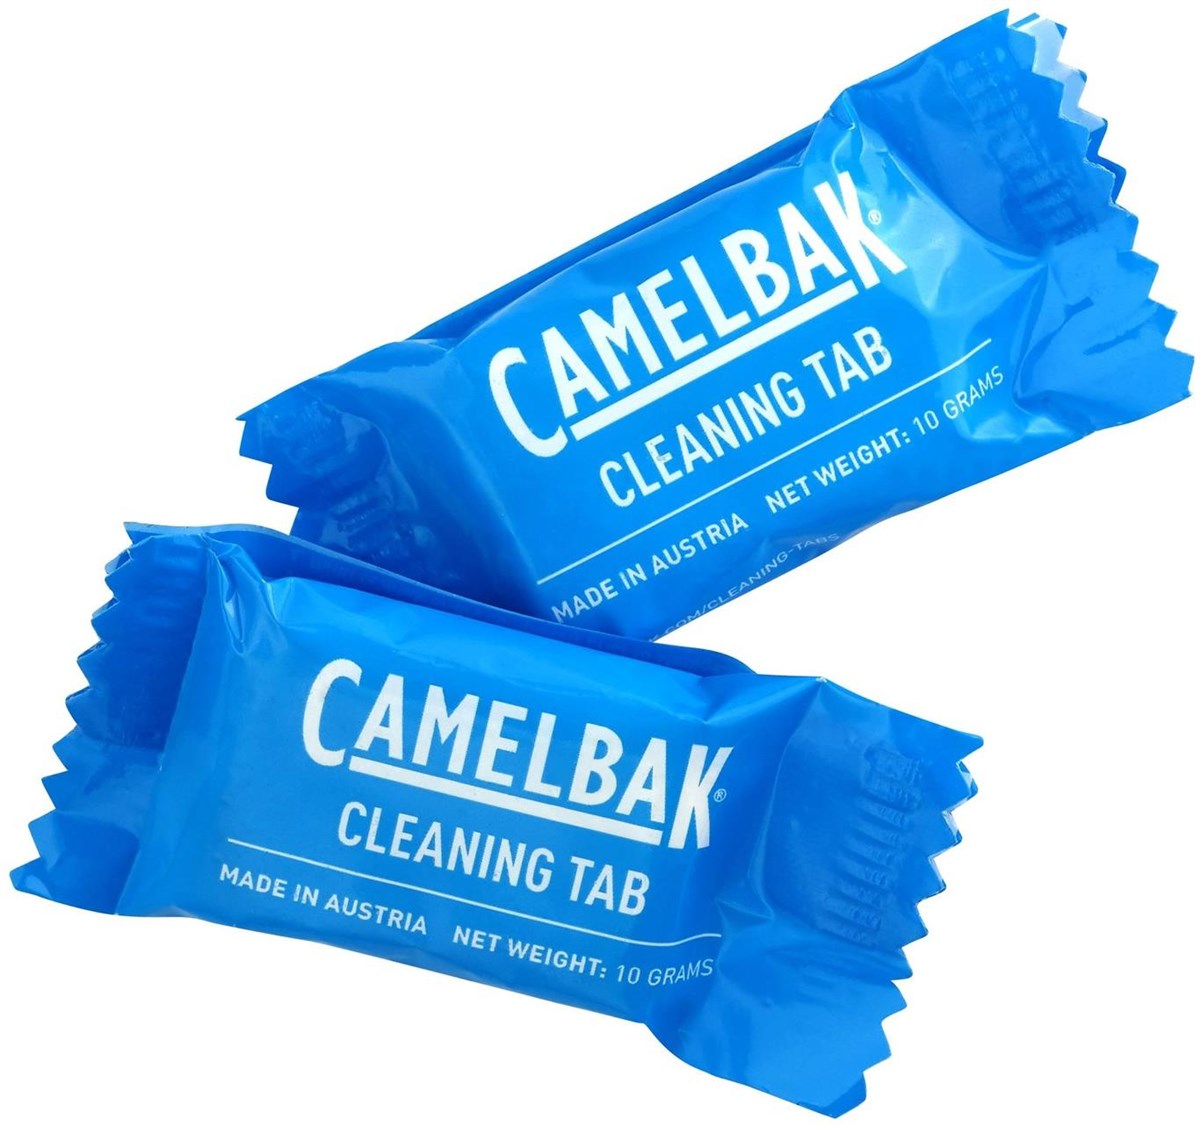 CamelBak Cleaning Tablets 8-pack product image